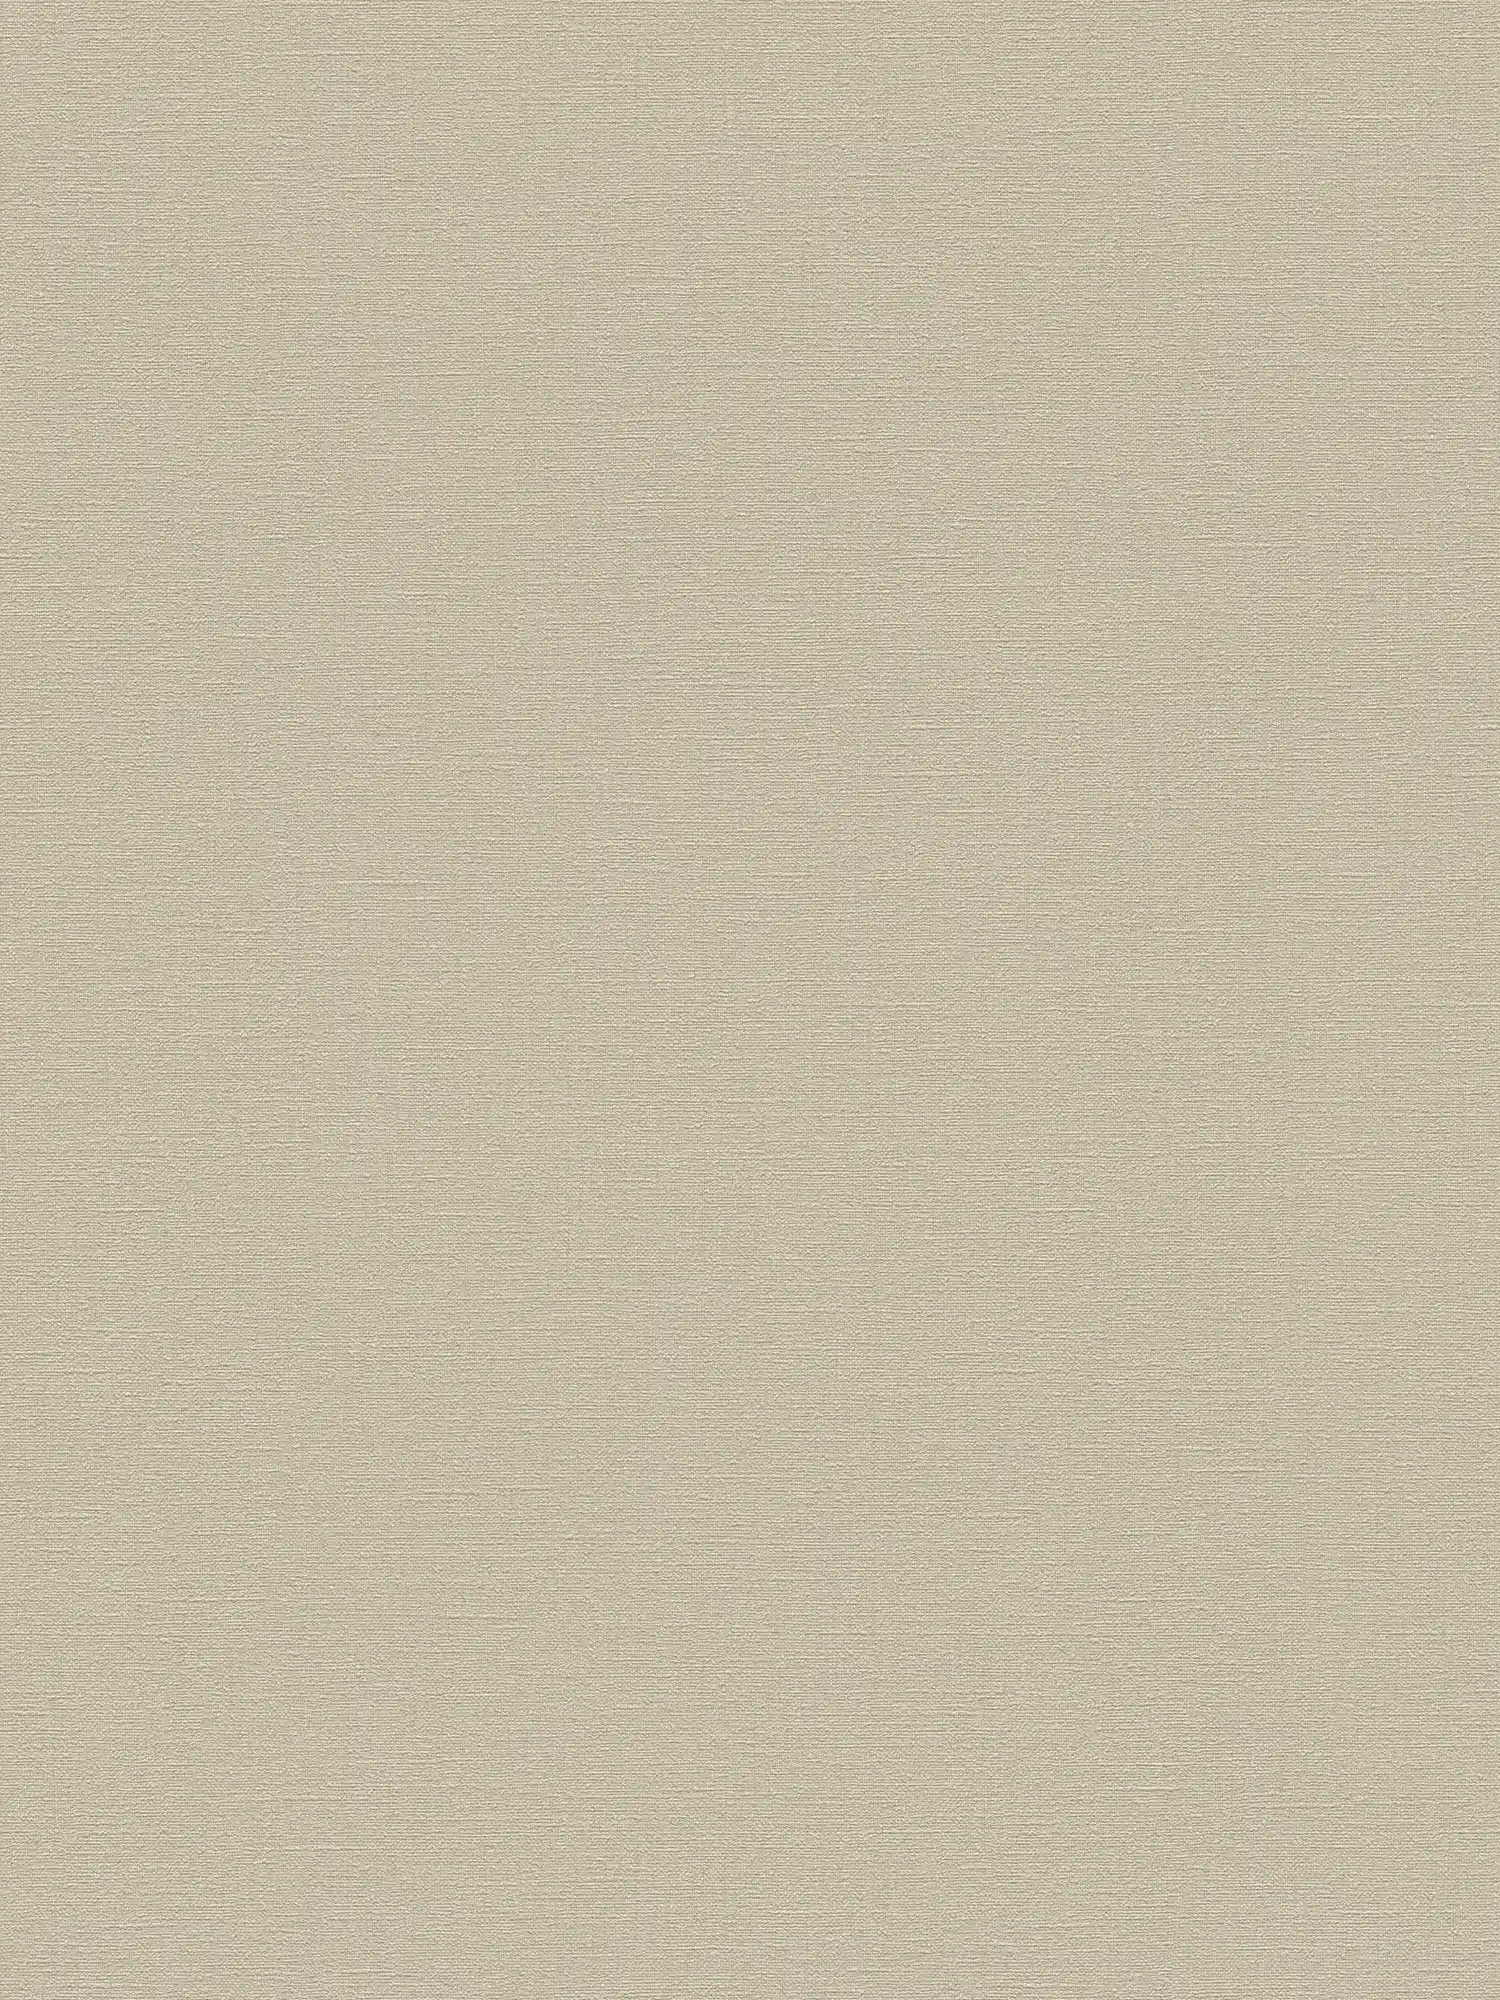 wallpaper plain ivory, matte with texture pattern
